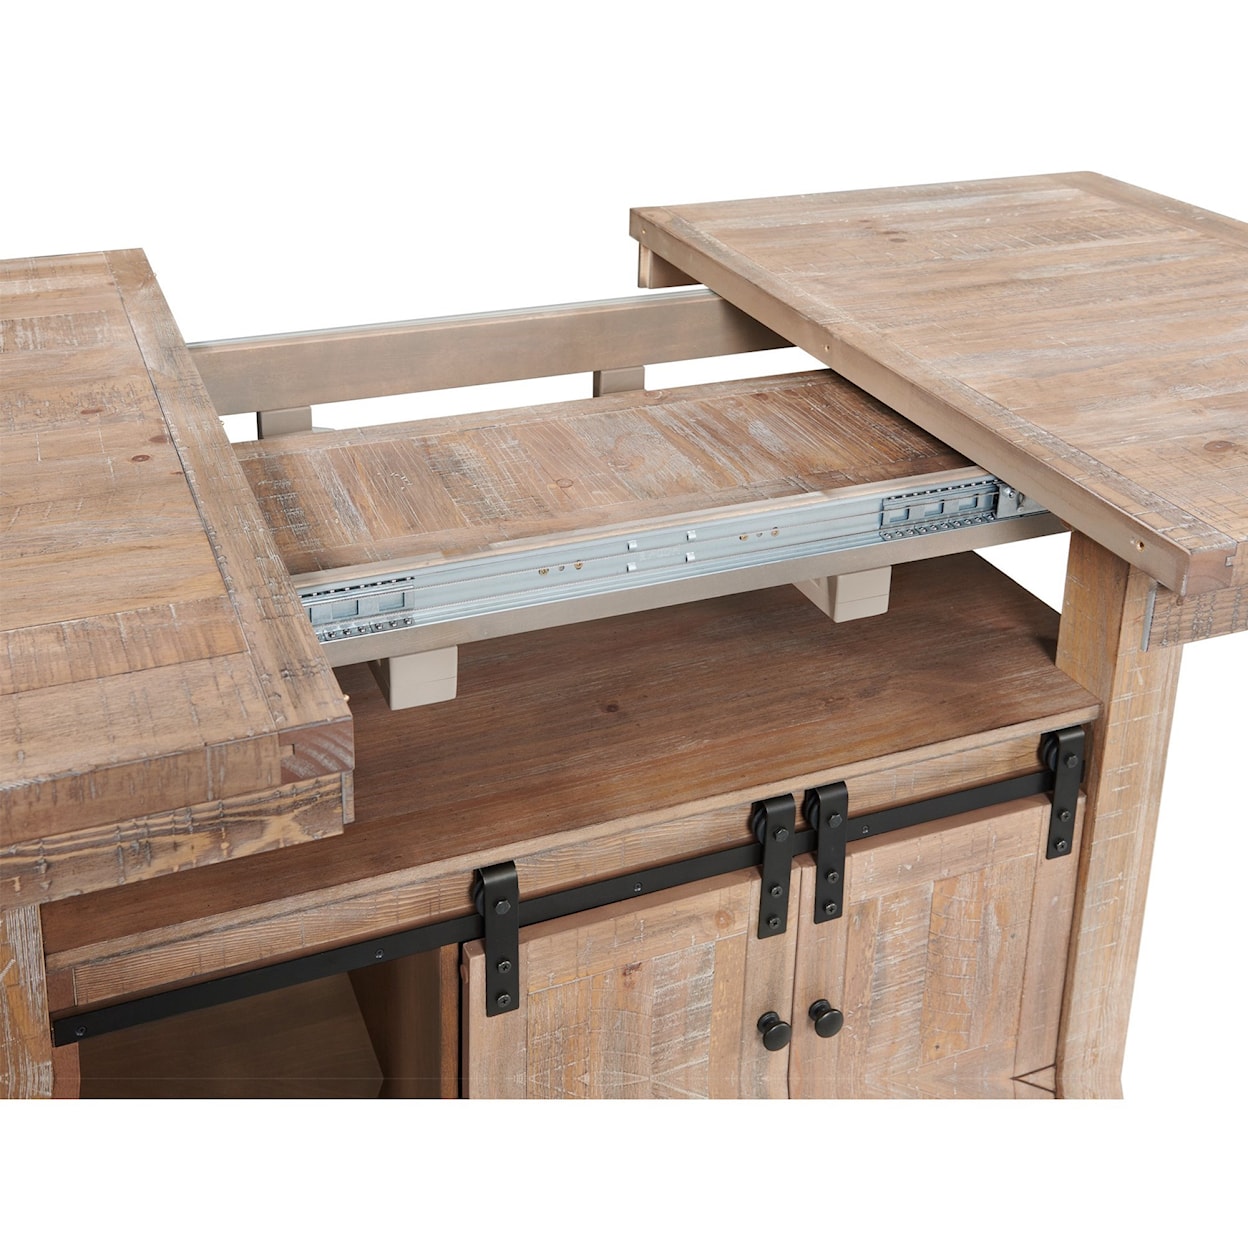 Belfort Select Hillgate Counter Height Table